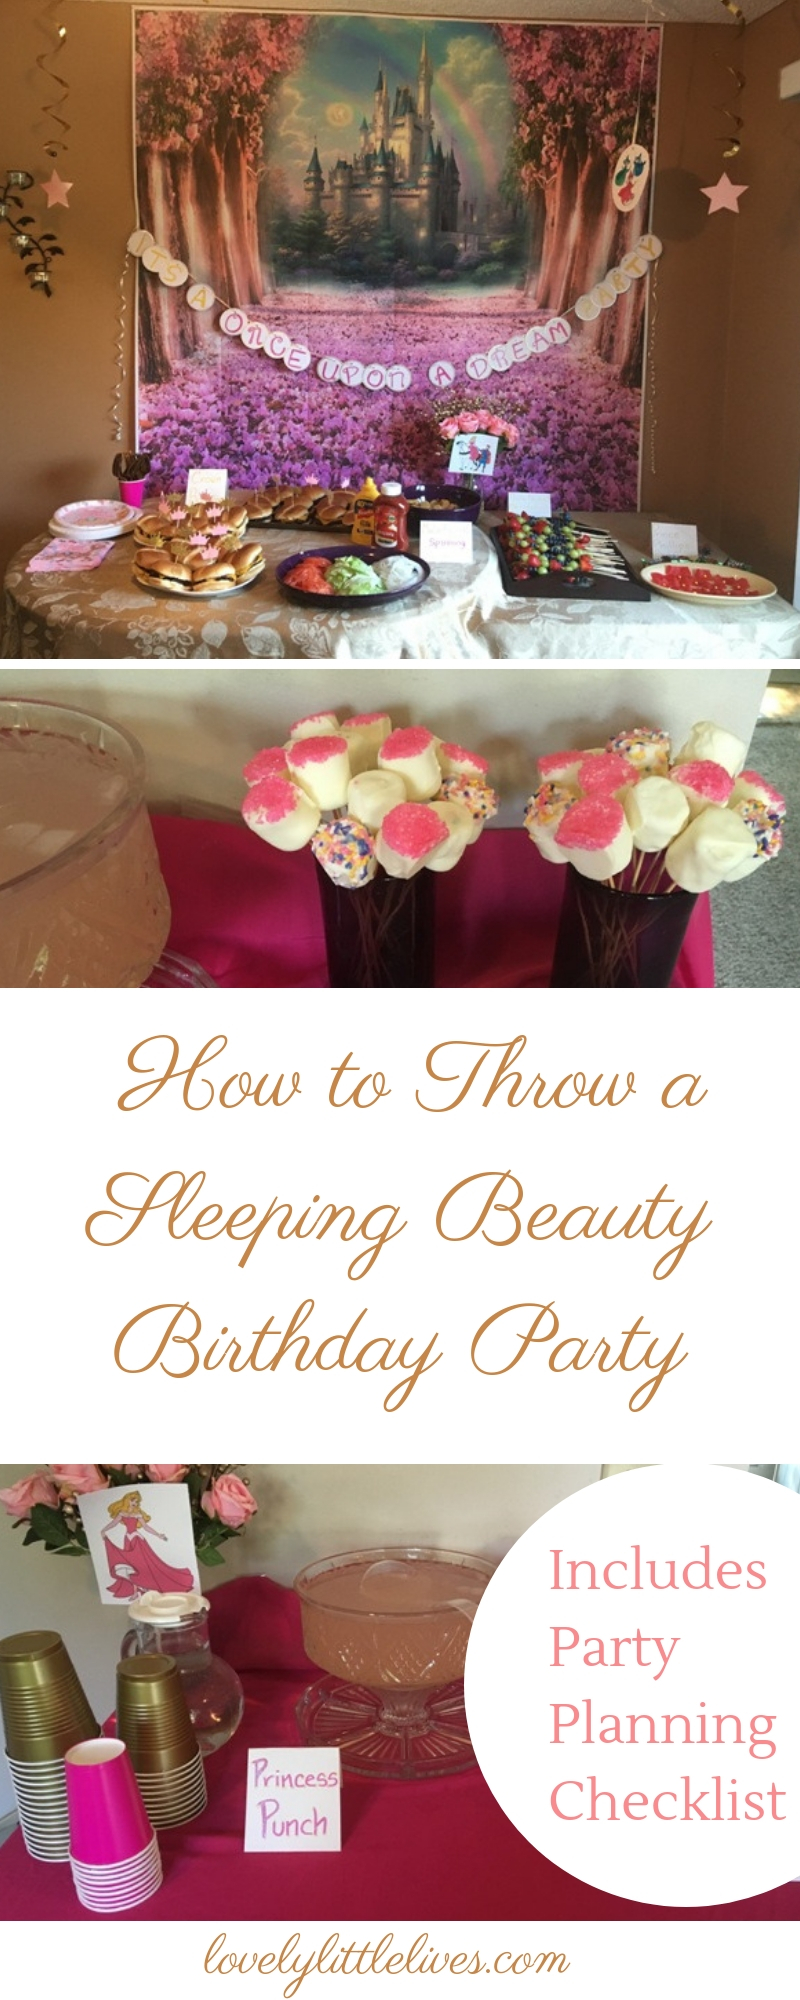 How to Throw a Lovely Sleeping Beauty Birthday Party #princessparties #sleepingbeautybirthdayparty #princessauroraparty #disneyprincessparty